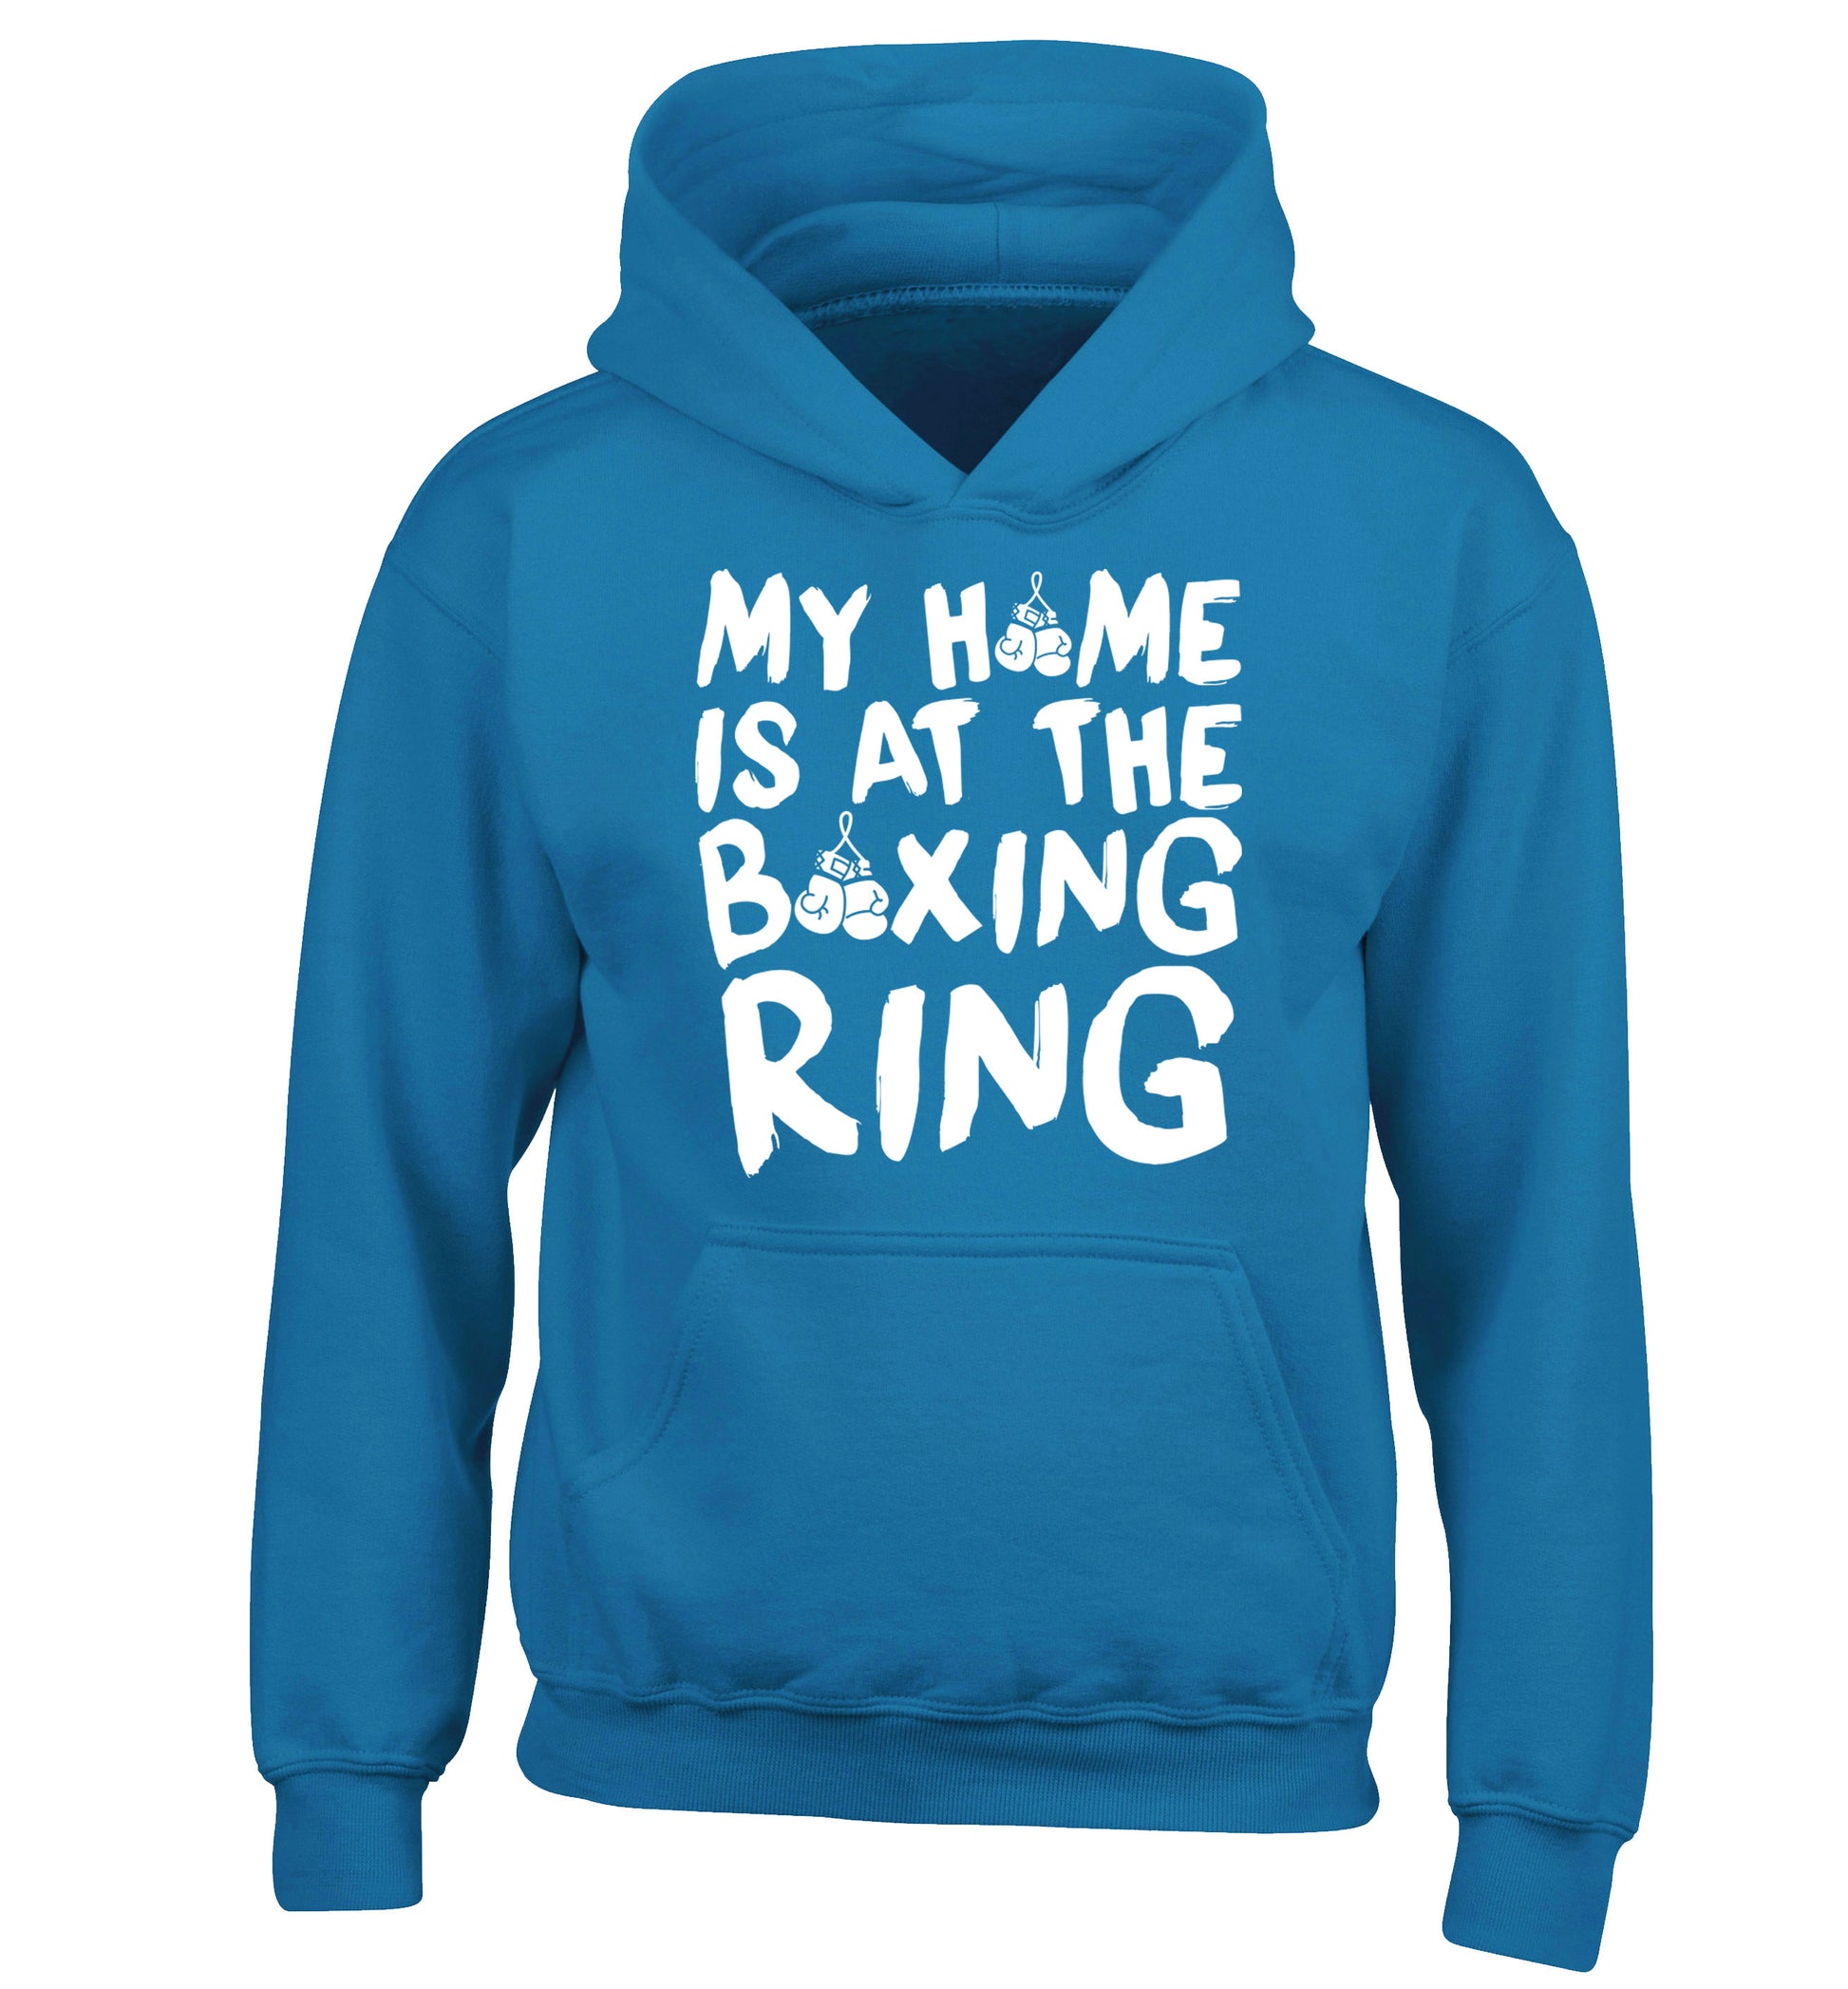 My home is at the boxing ring children's blue hoodie 12-14 Years